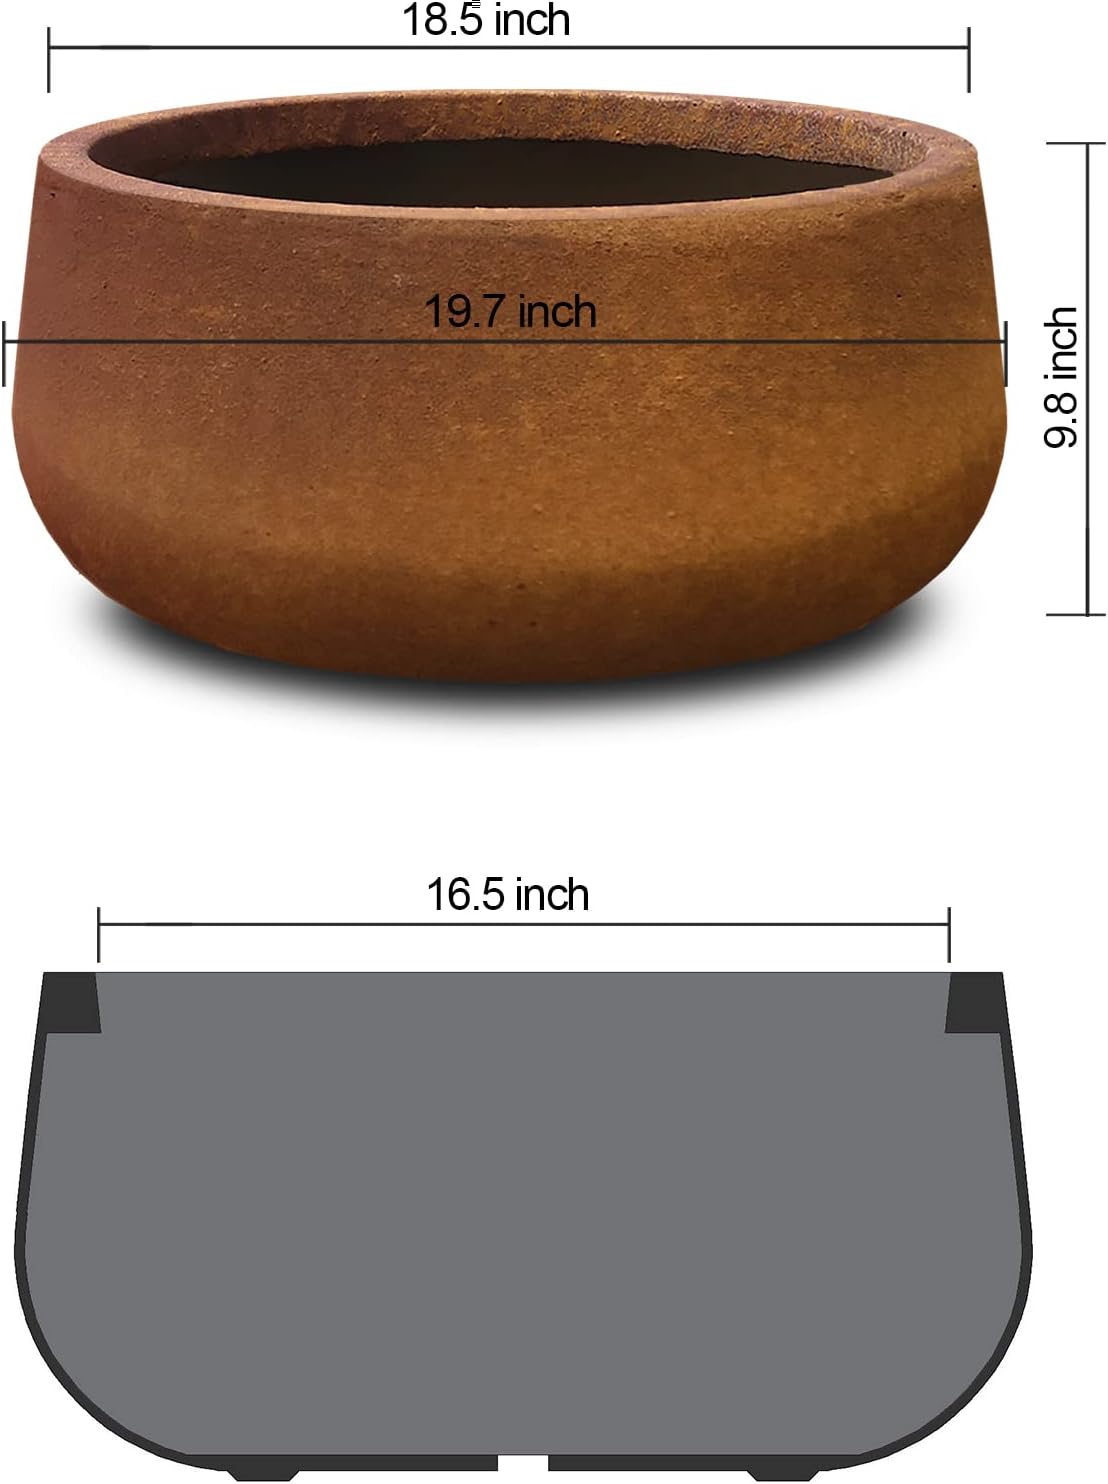 Kante 19.6" Dia Round Concrete Planter, Outdoor Indoor Garden Plant Pots with Drainage Hole and Rubber Plug, Modern Curvaceous Design, Iron Oxide